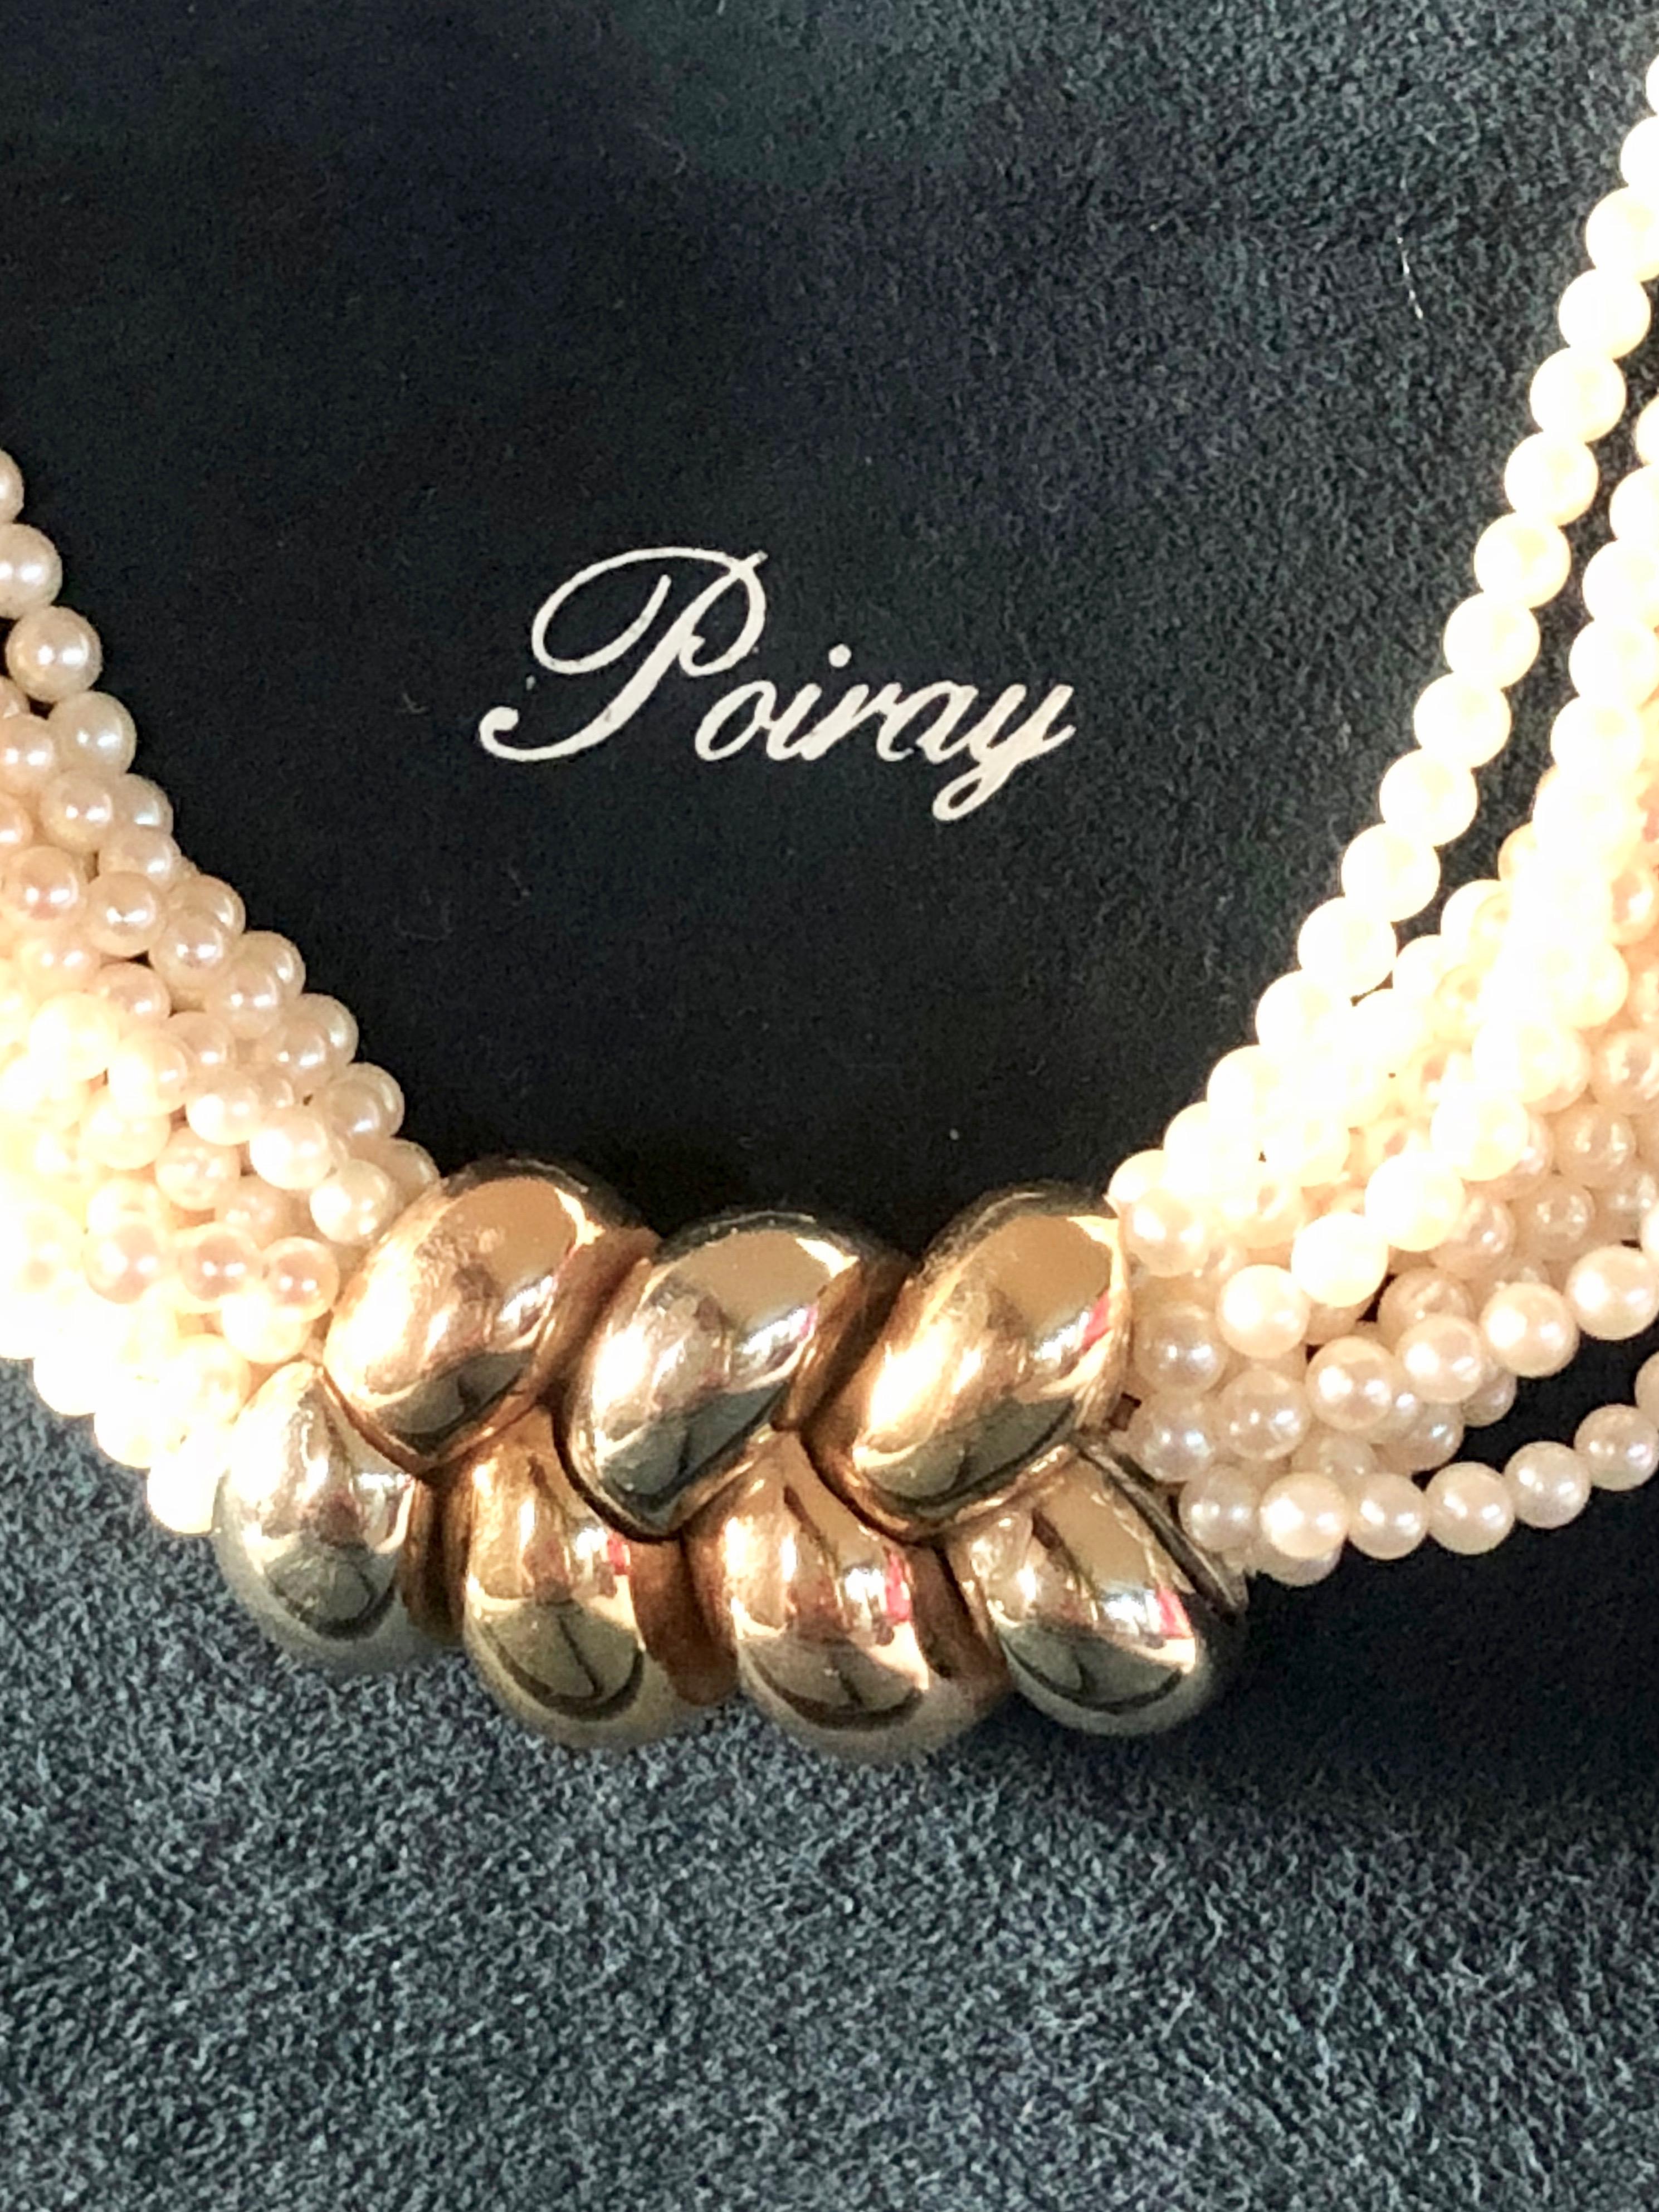 Elegant and timeless torsade necklace made of 15 strands of Akoya pearls. 
Features a 18K gold (yellow, white, pink) clasp with Poiray maker's mark. 
Wrist Lenght: 42 cm
Condition: Very Good
Comes With: Original Poiray pouch 

All items at la Bourse